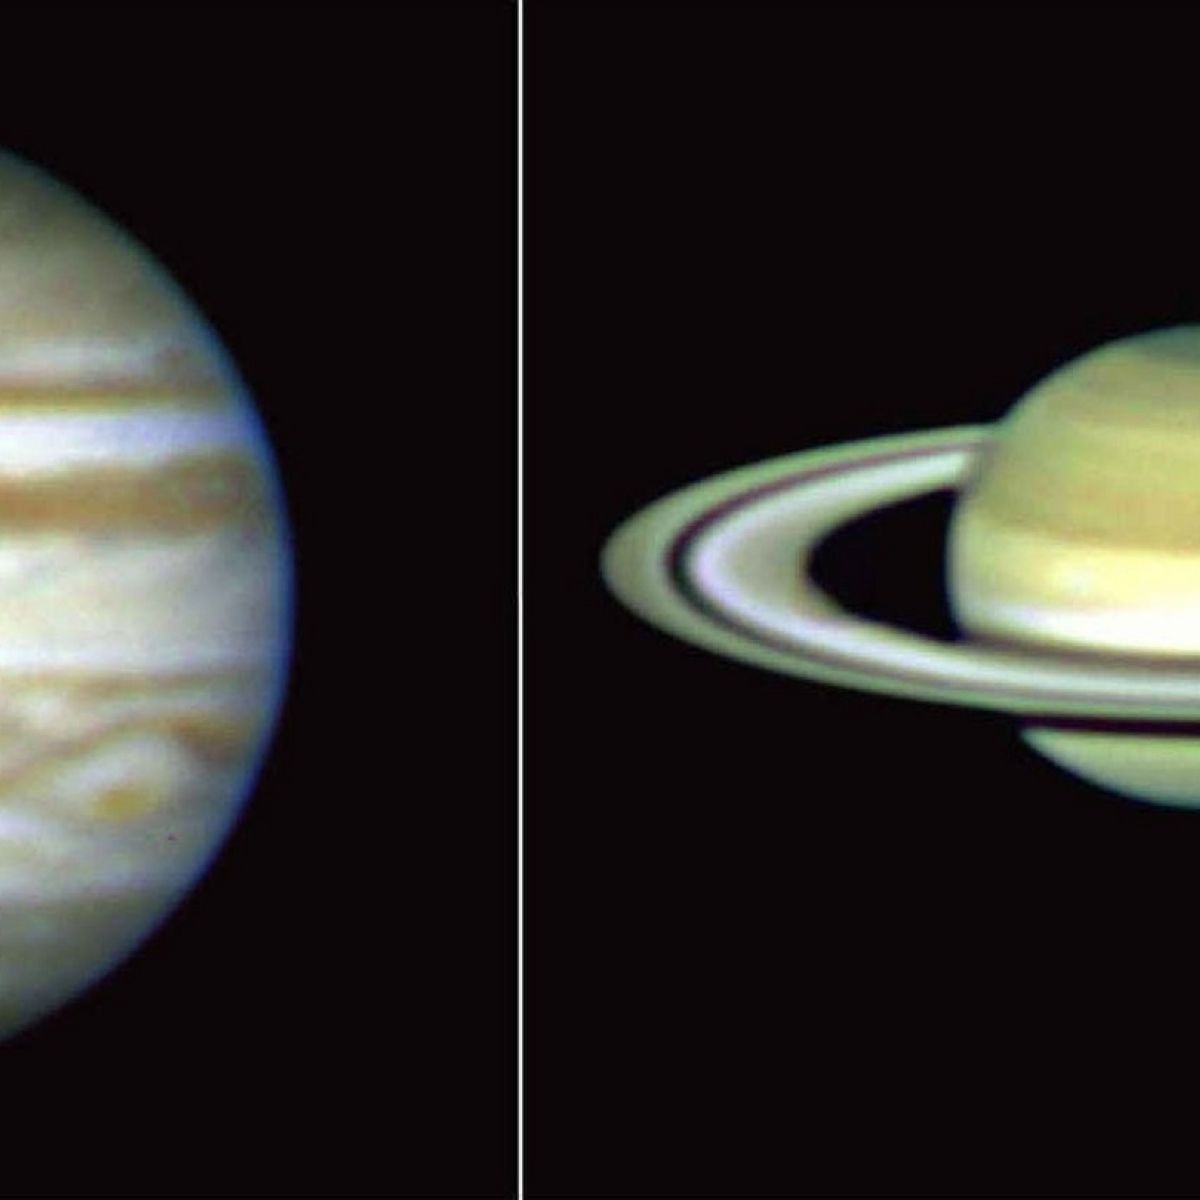 december sky jupiter and saturn to appear closest to each other since 400 years ago